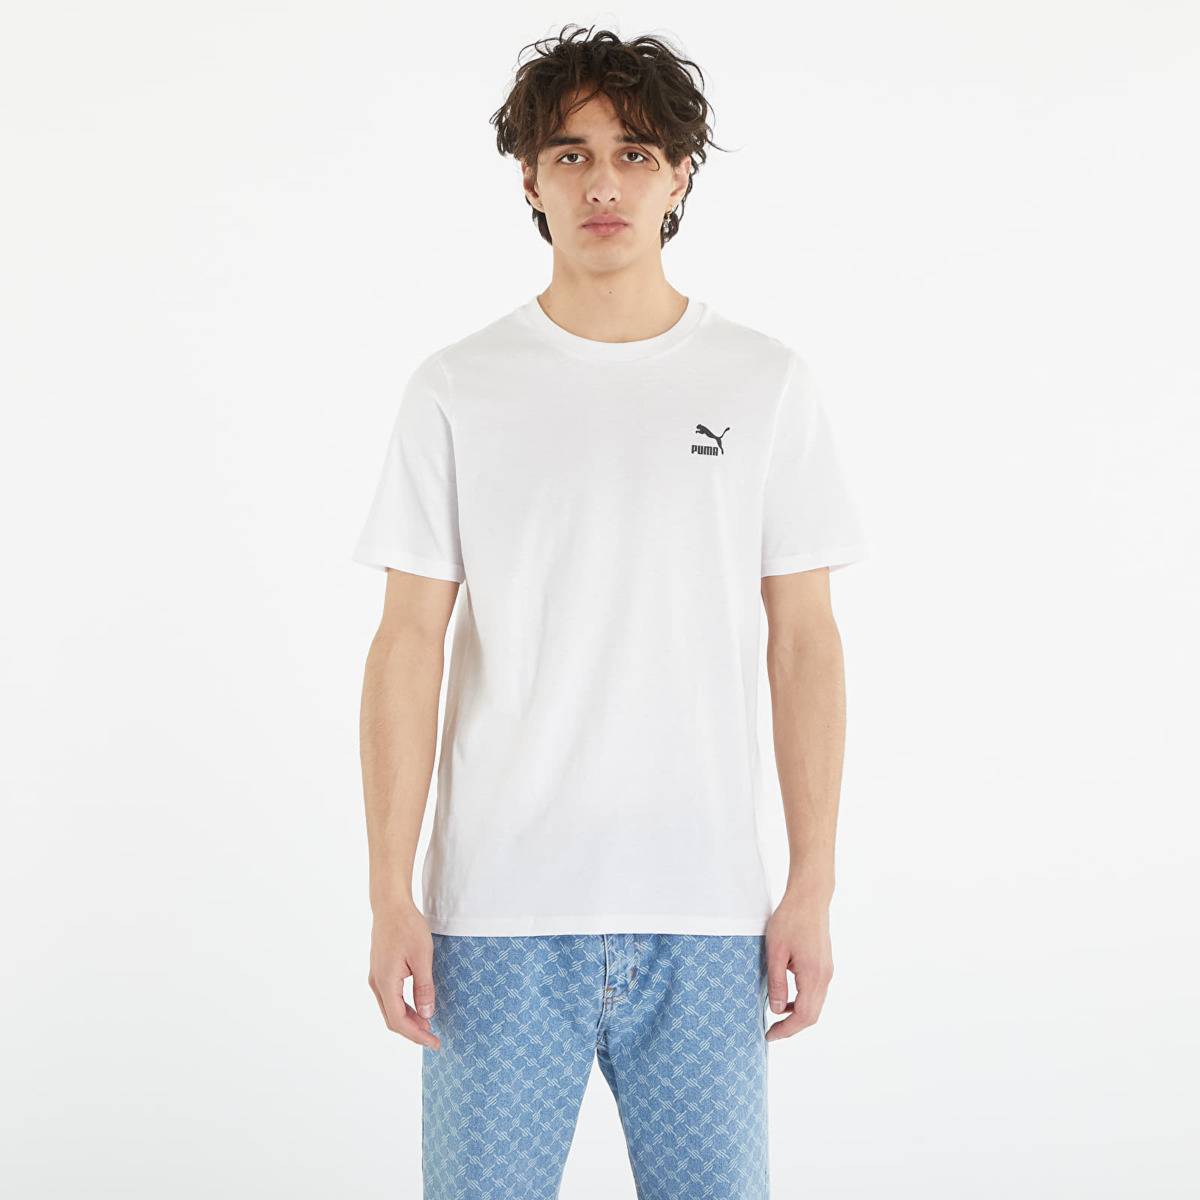 White Top for Men from Footshop GOOFASH